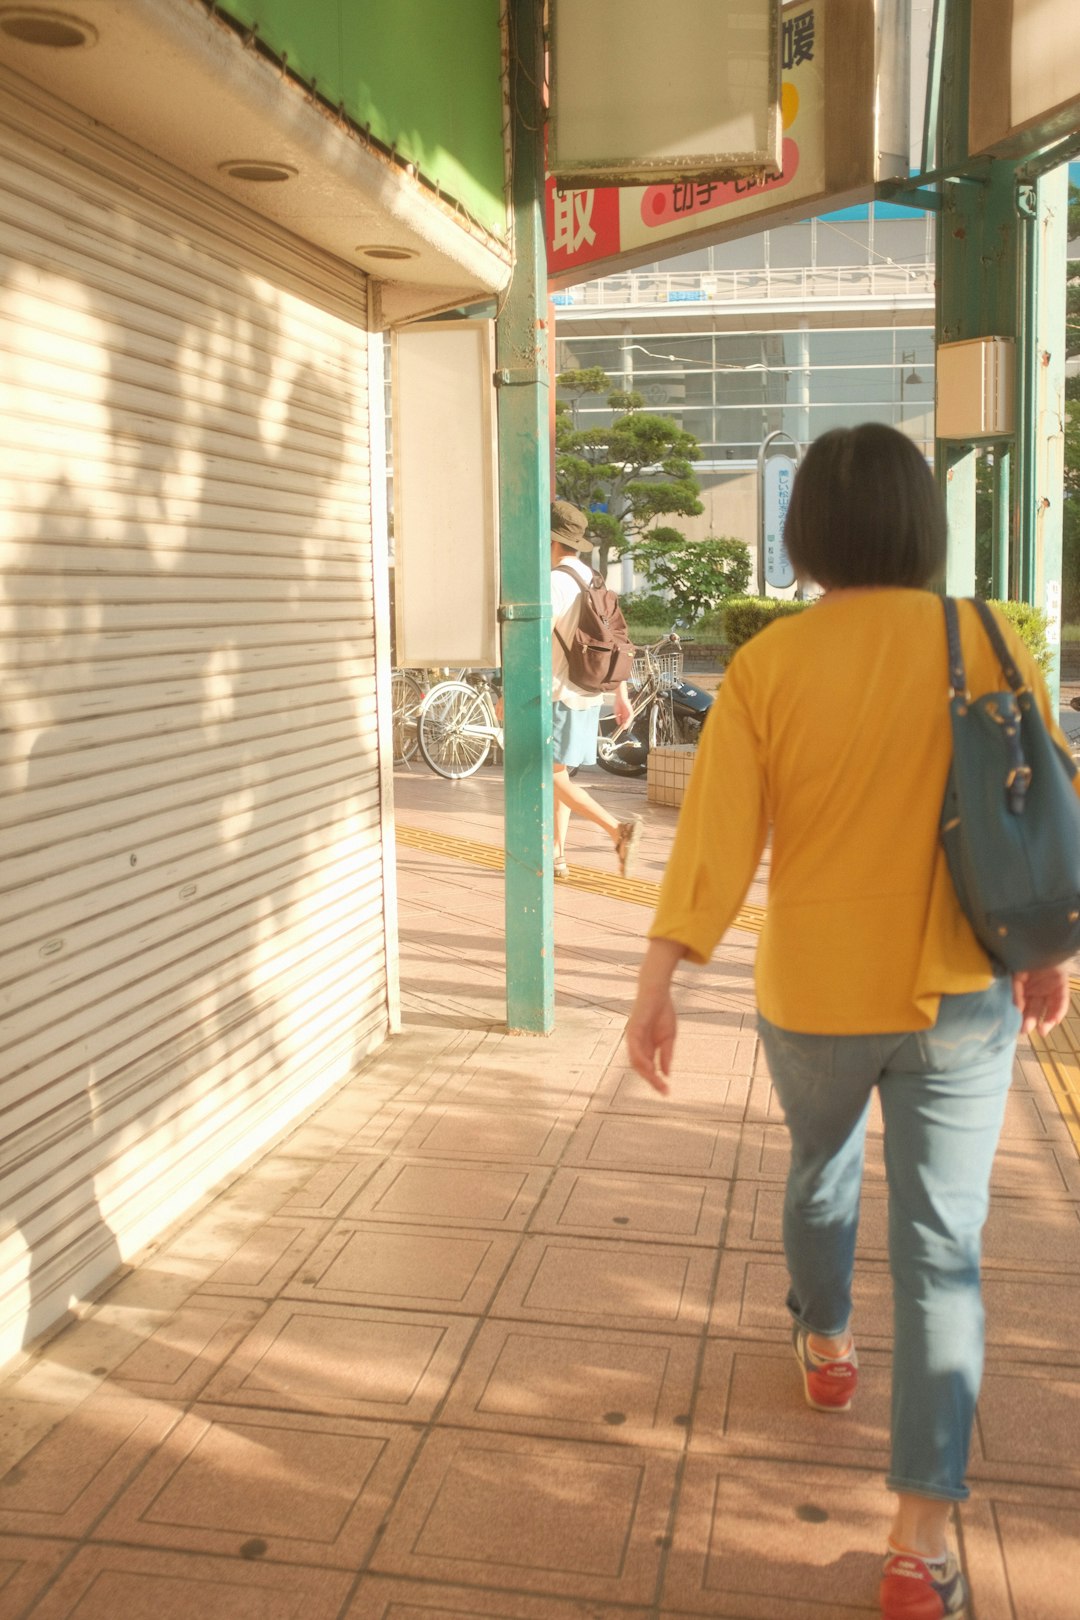 woman in yellow shirt and blue denim jeans walking on brown wooden floor